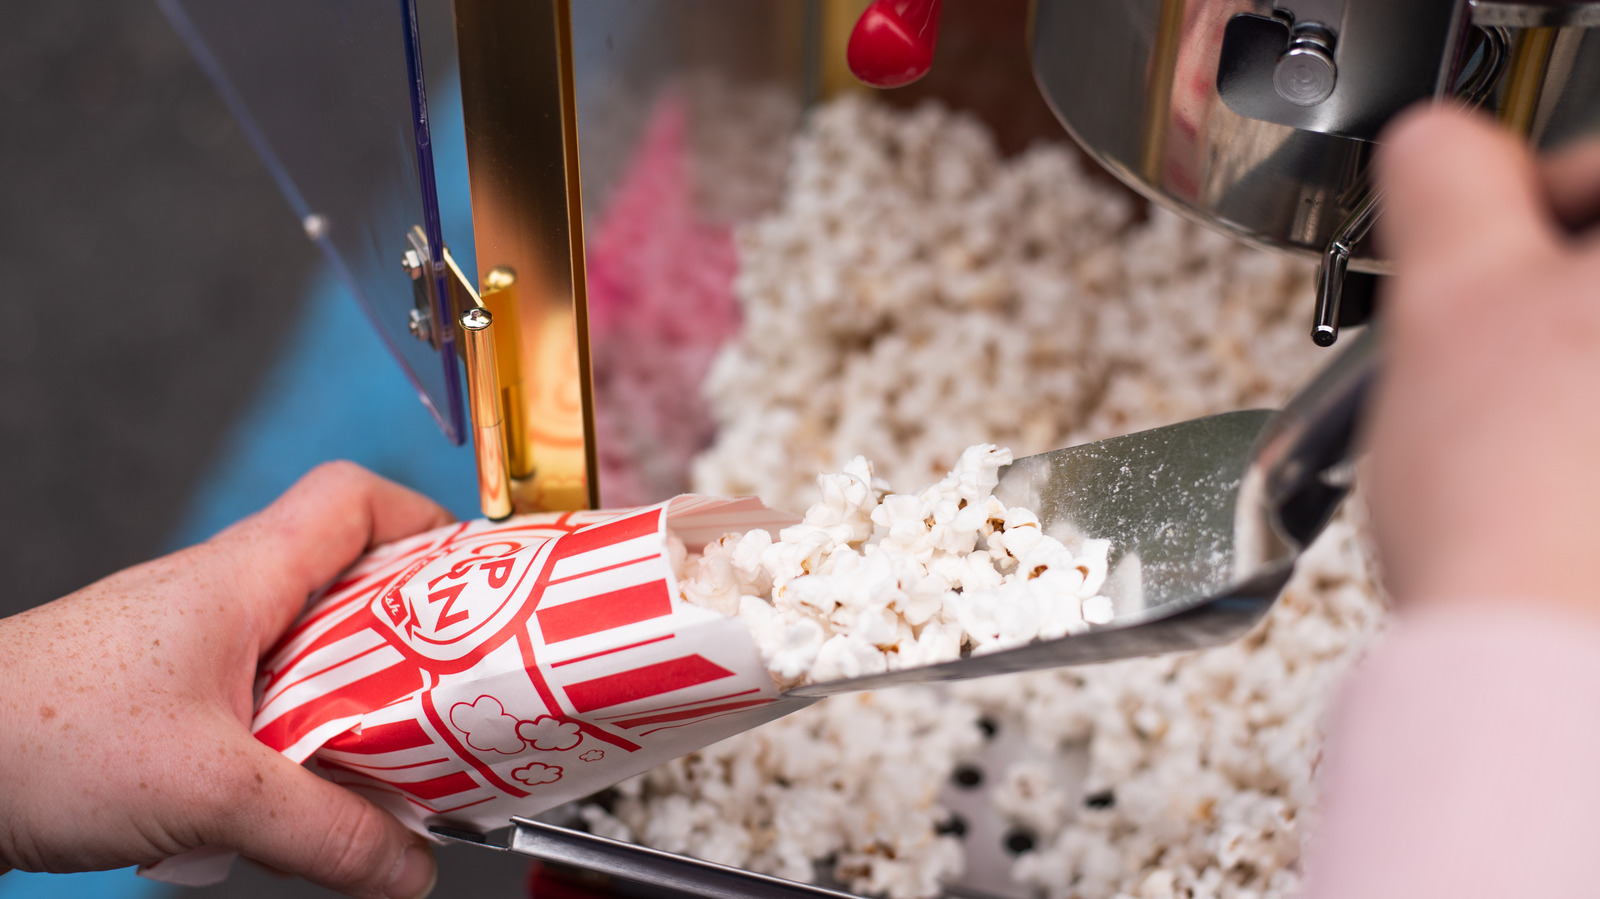 https://www.mashed.com/img/gallery/the-best-popcorn-makers/l-intro-1657061070.jpg